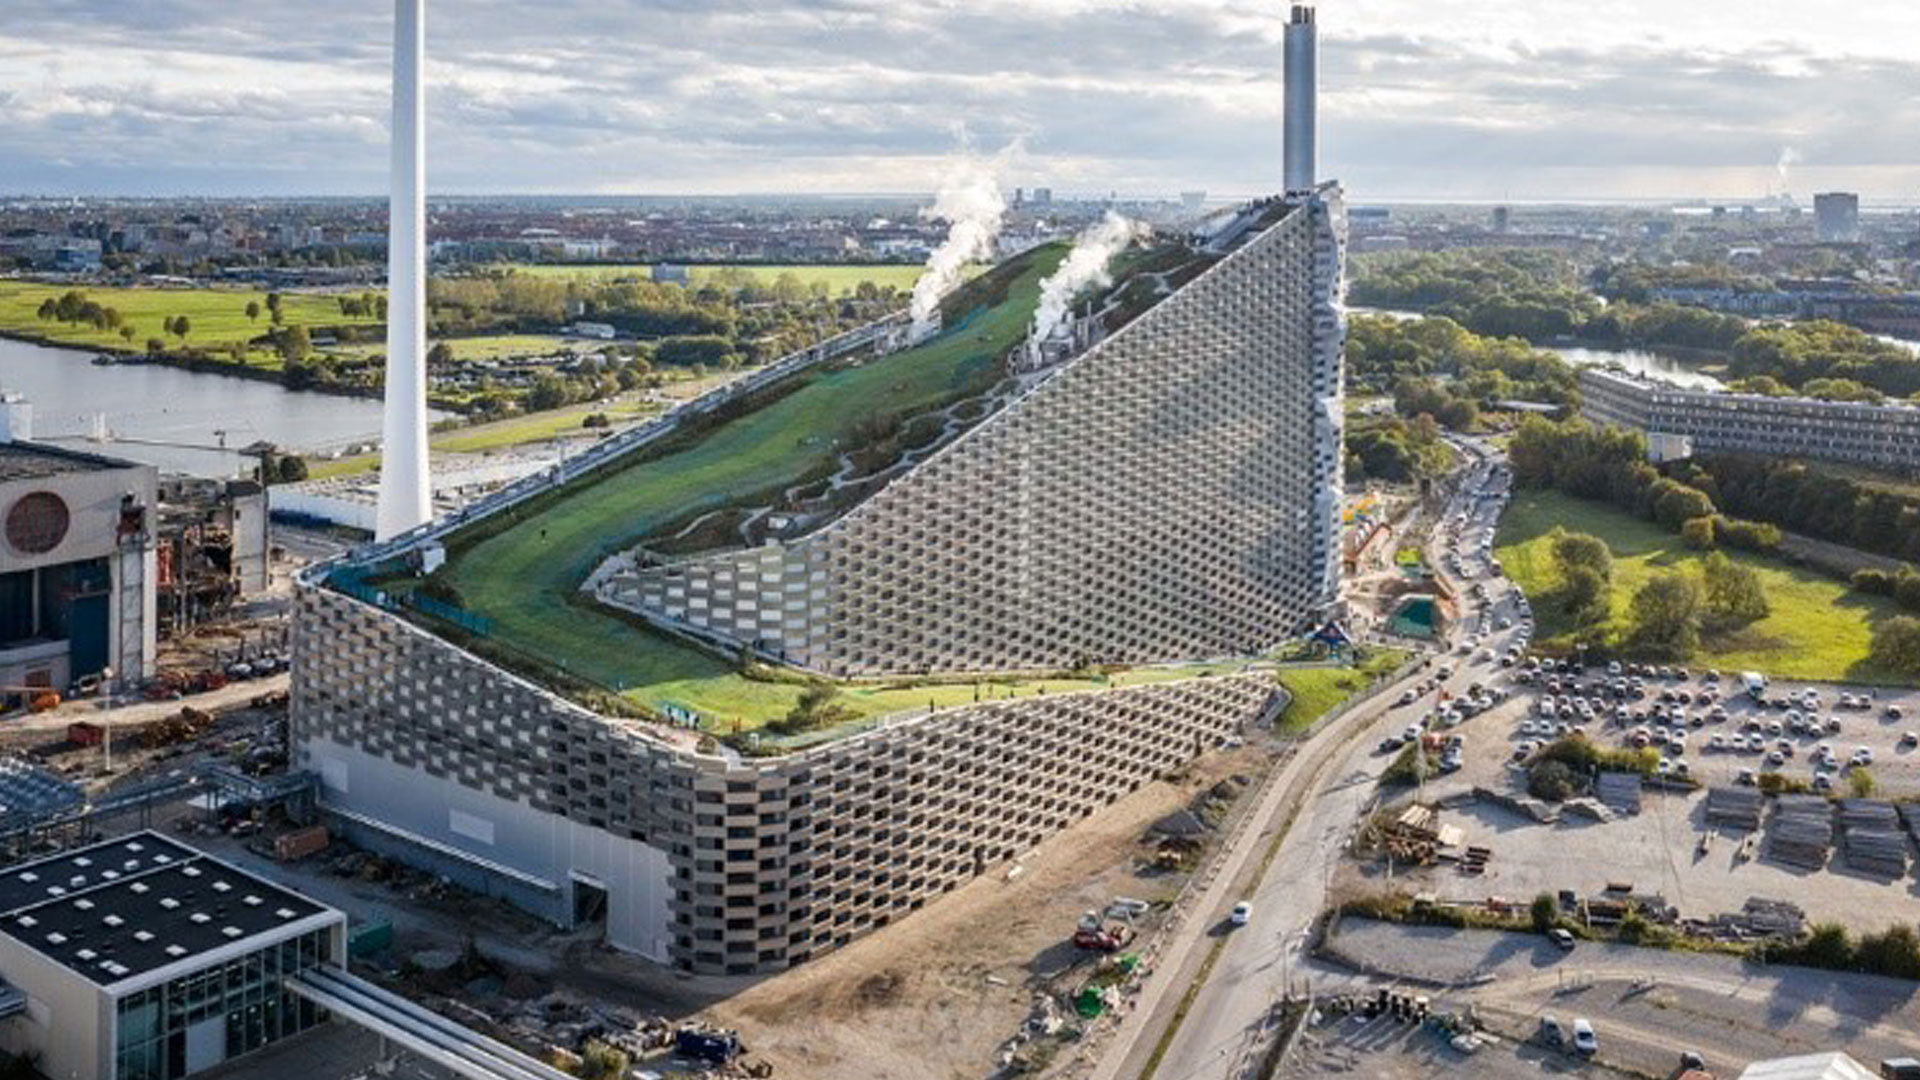 Sweden's waste-to-energy plants